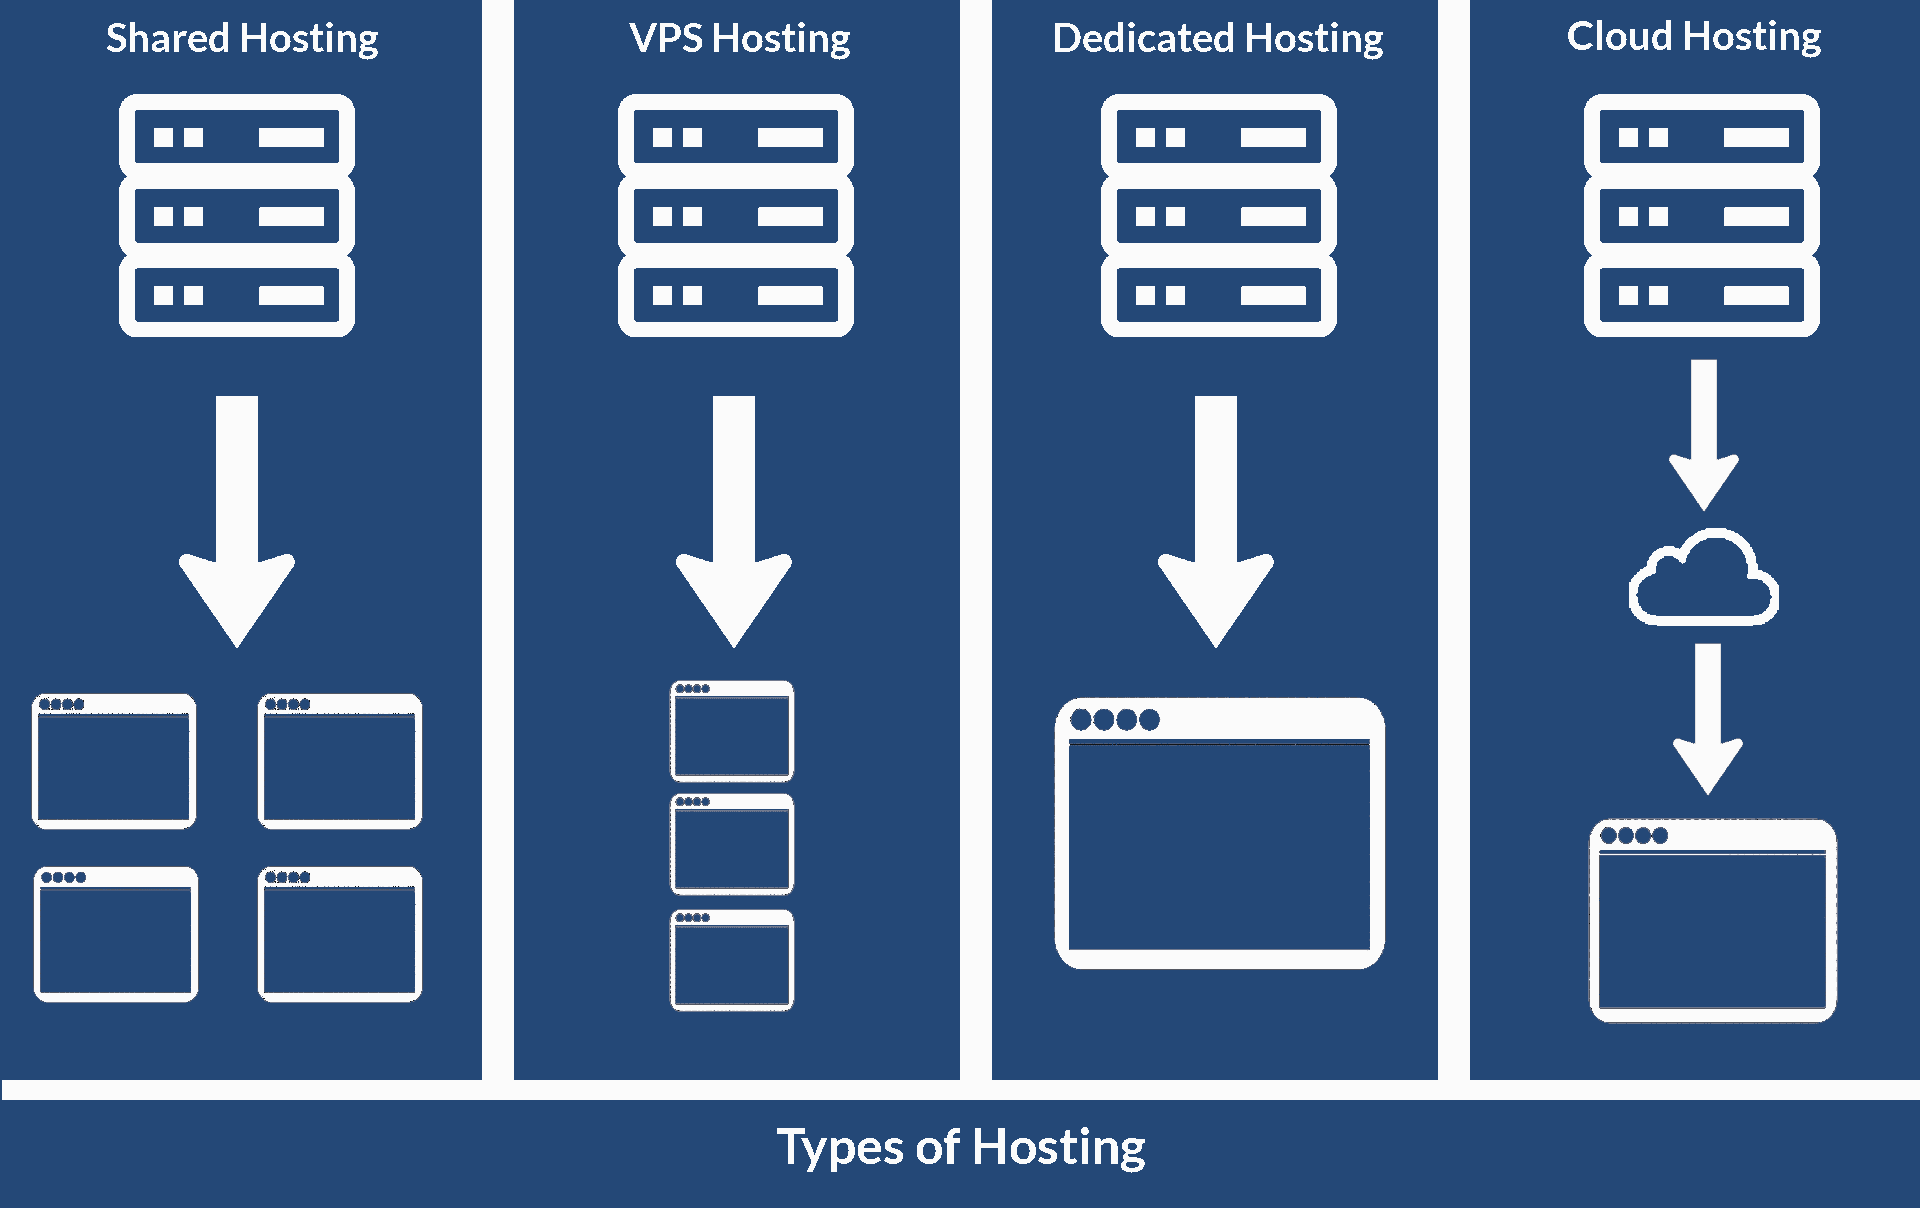 All types of hosting